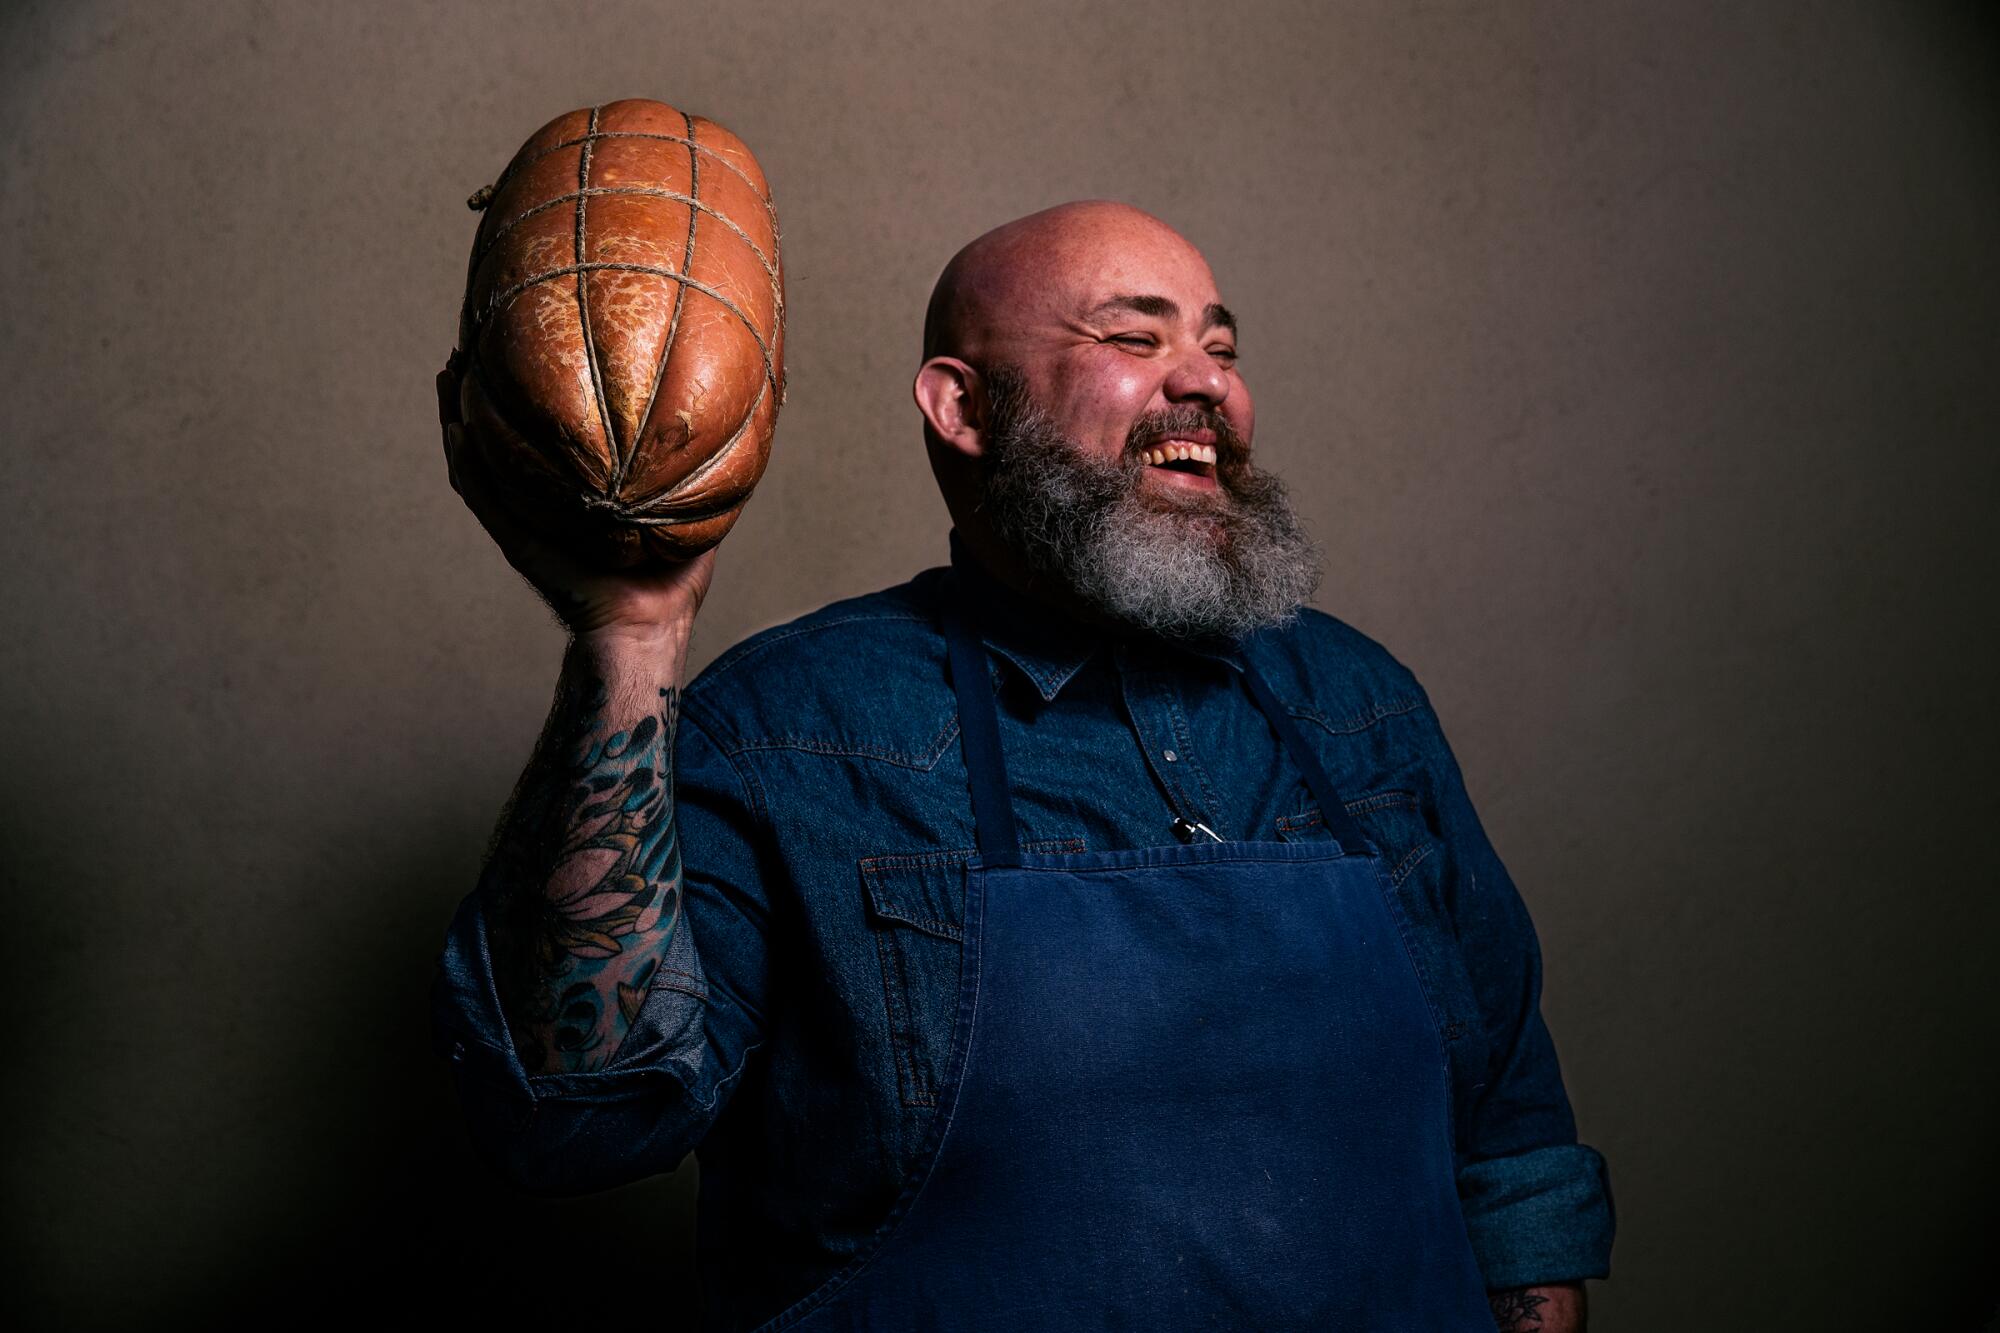 A laughing, bearded chef holds up an Italian football-shaped meat, mortadella, his favorite salumi.